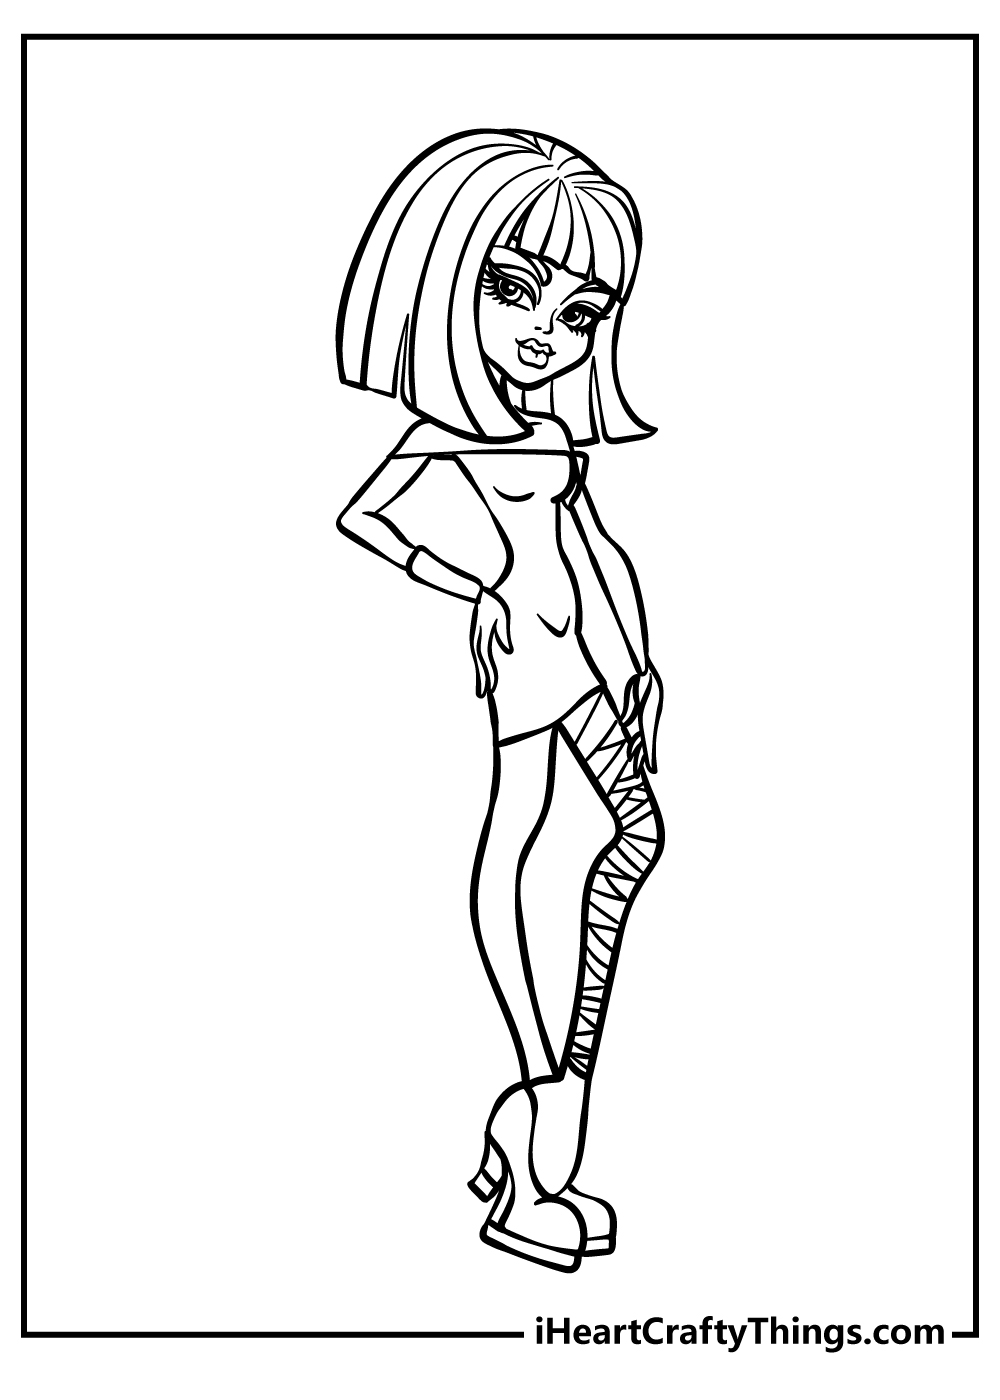 Monster High Coloring Pages free pdf download